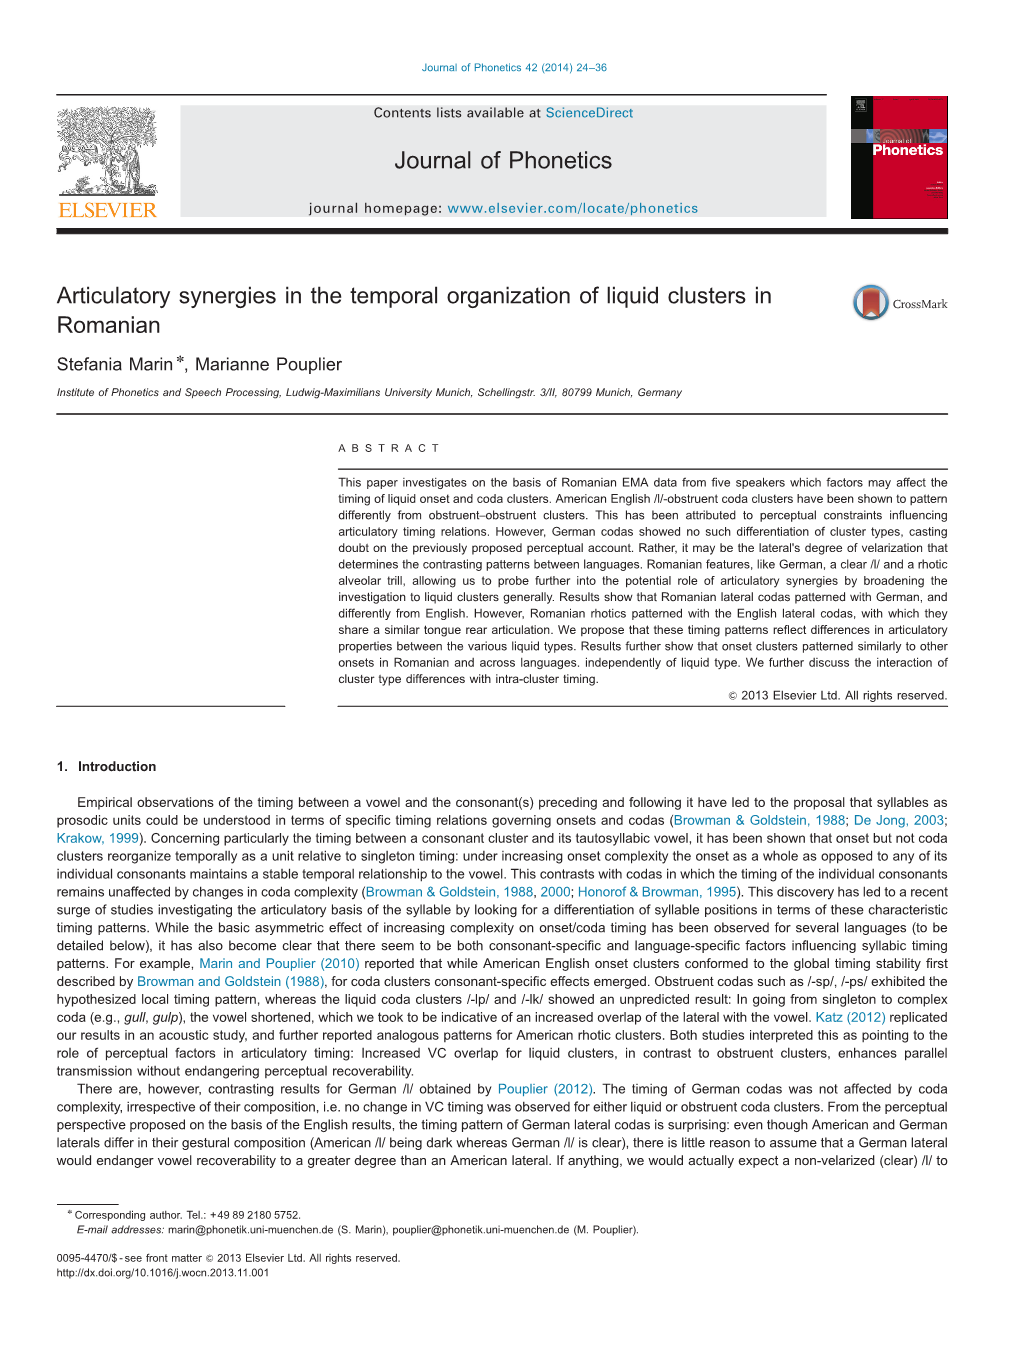 Articulatory Synergies in the Temporal Organization of Liquid Clusters in Romanian